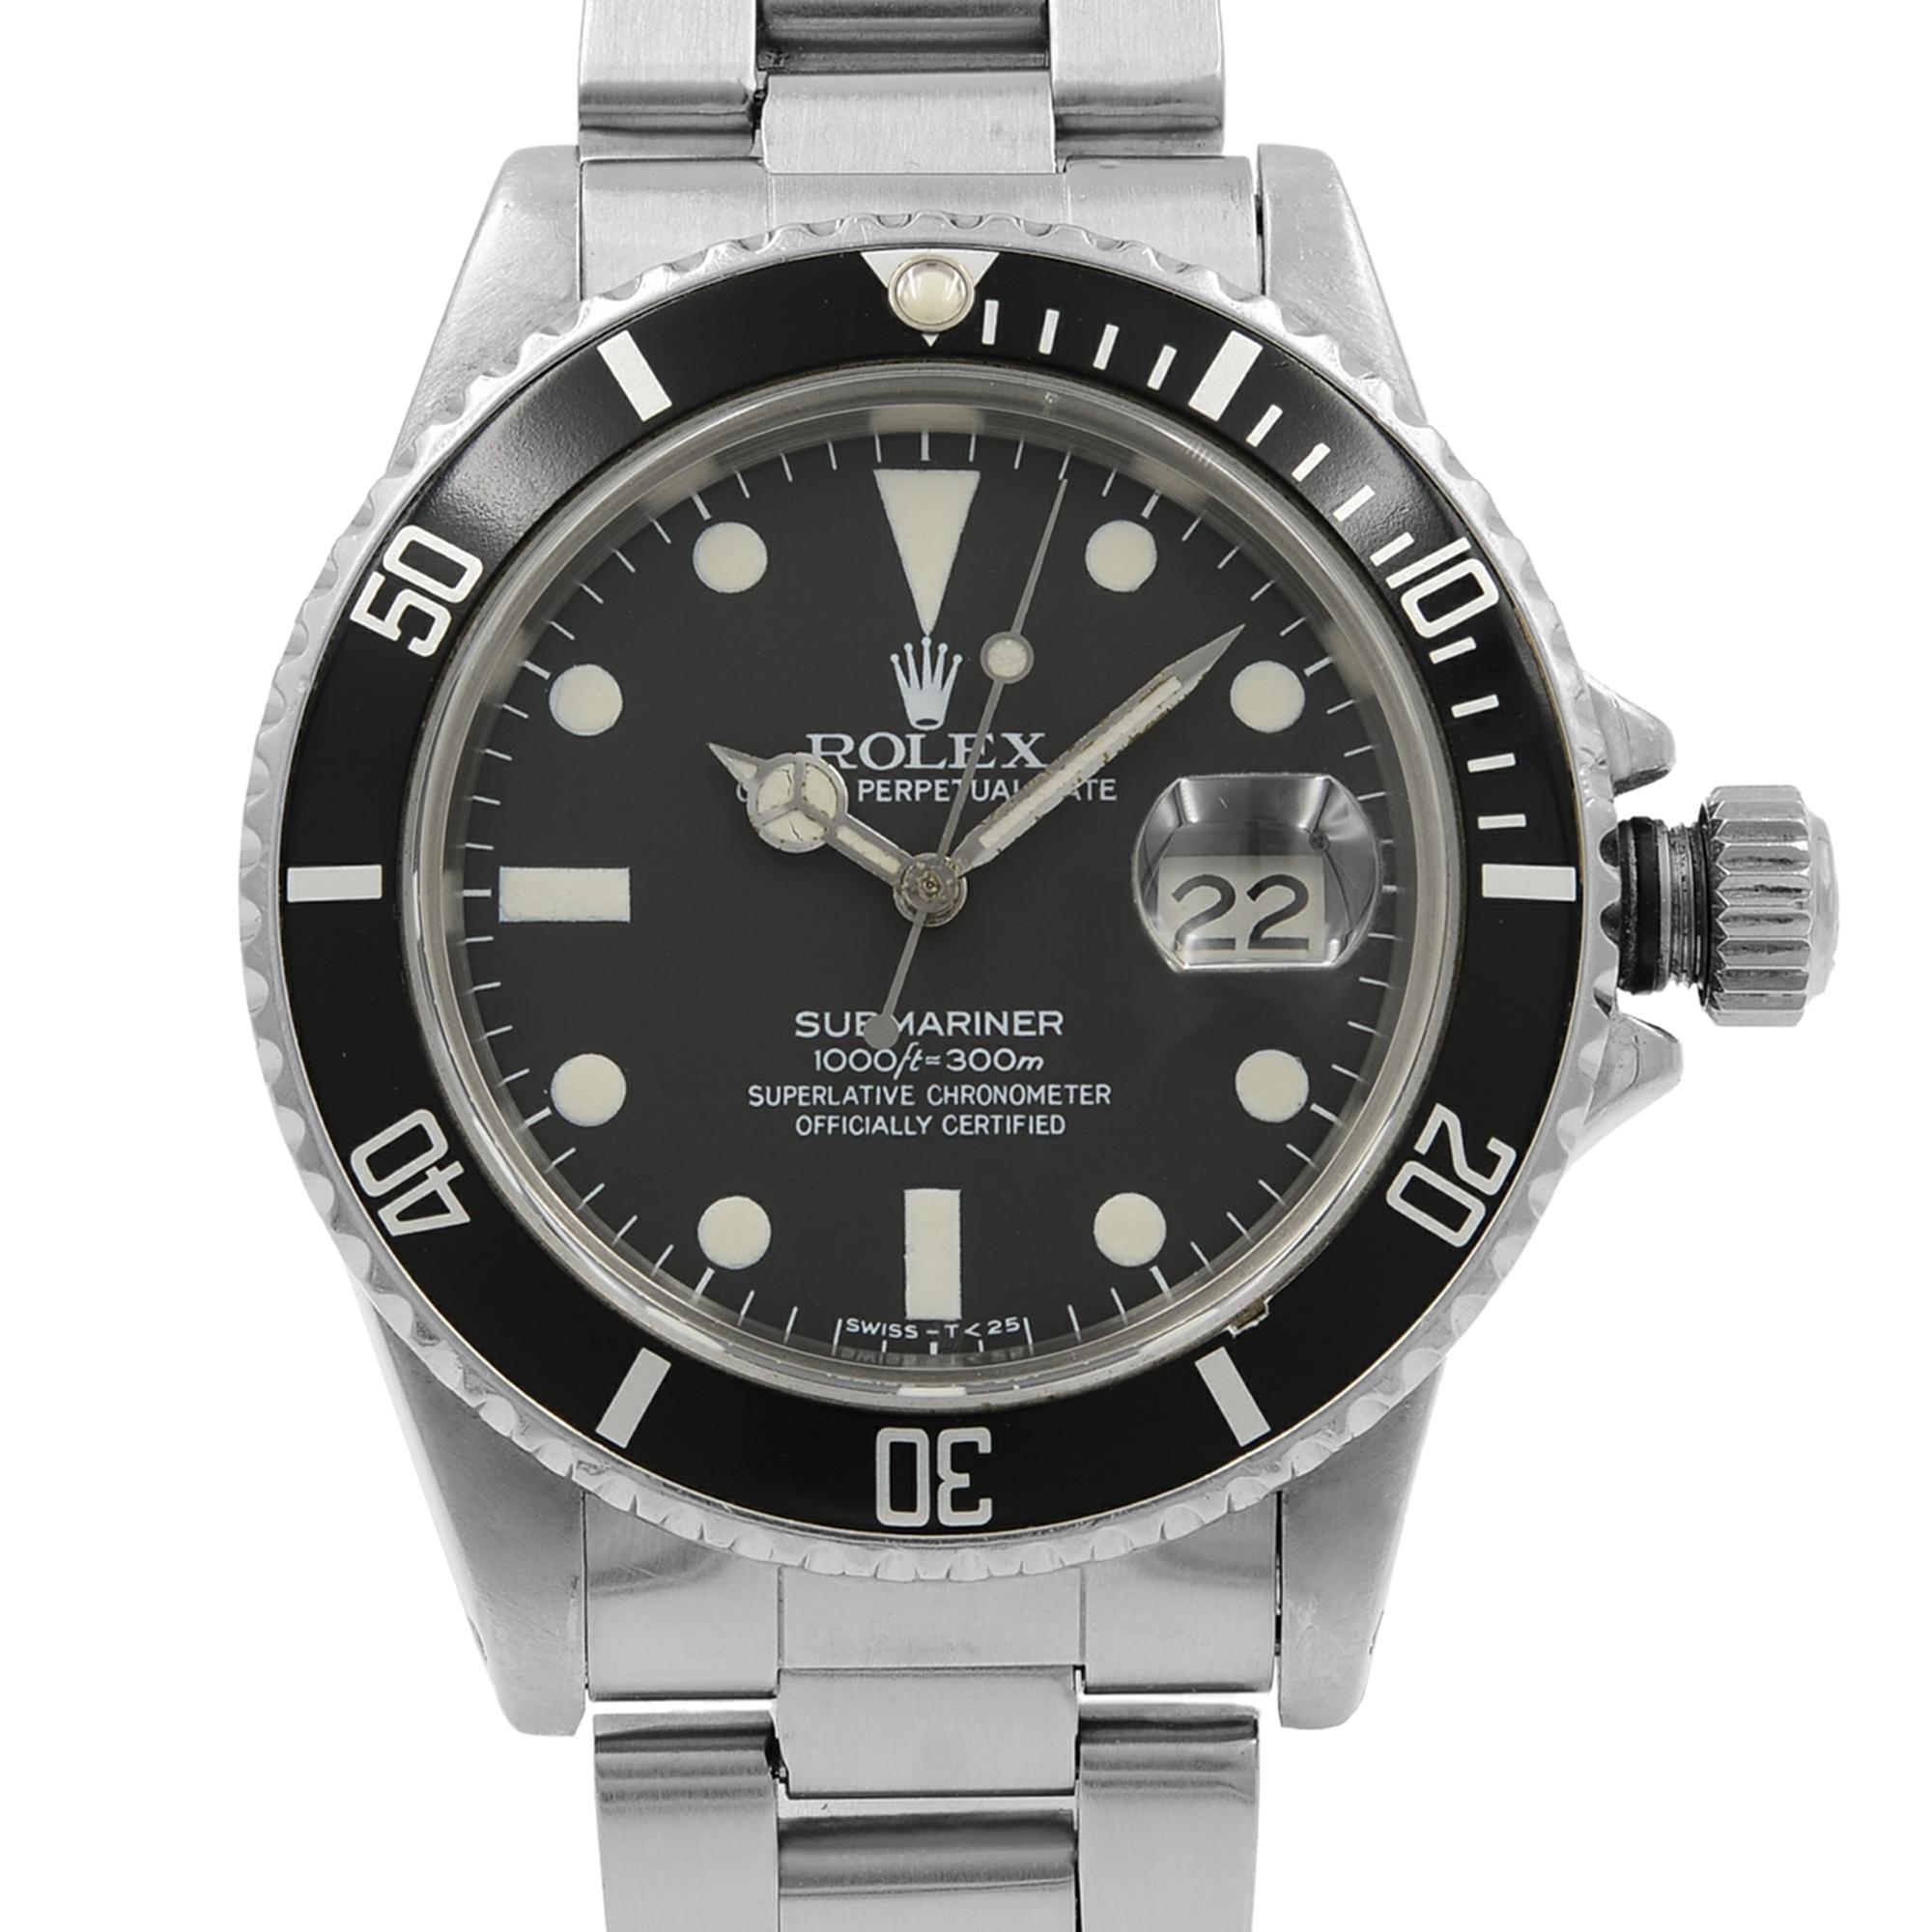 This pre-owned Rolex Submariner  16800 is a beautiful men's timepiece that is powered by an automatic movement which is cased in a stainless steel case. It has a round shape face, date dial and has hand sticks & dots style markers. It is completed